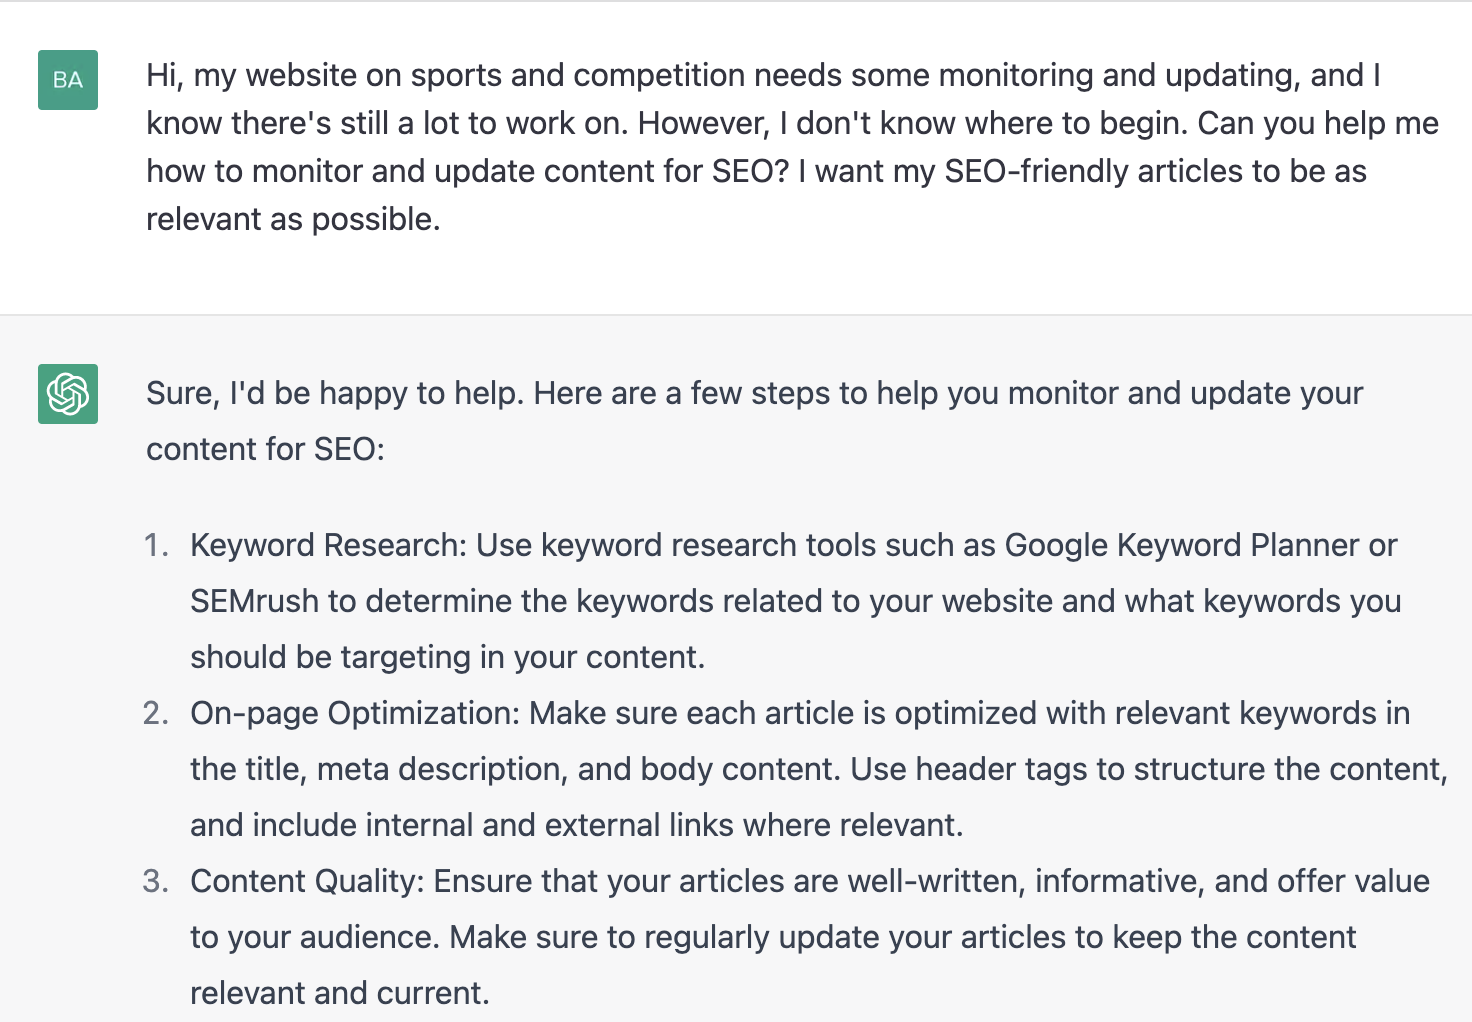 ChatGPT prompt about how to monitor and update content for SEO